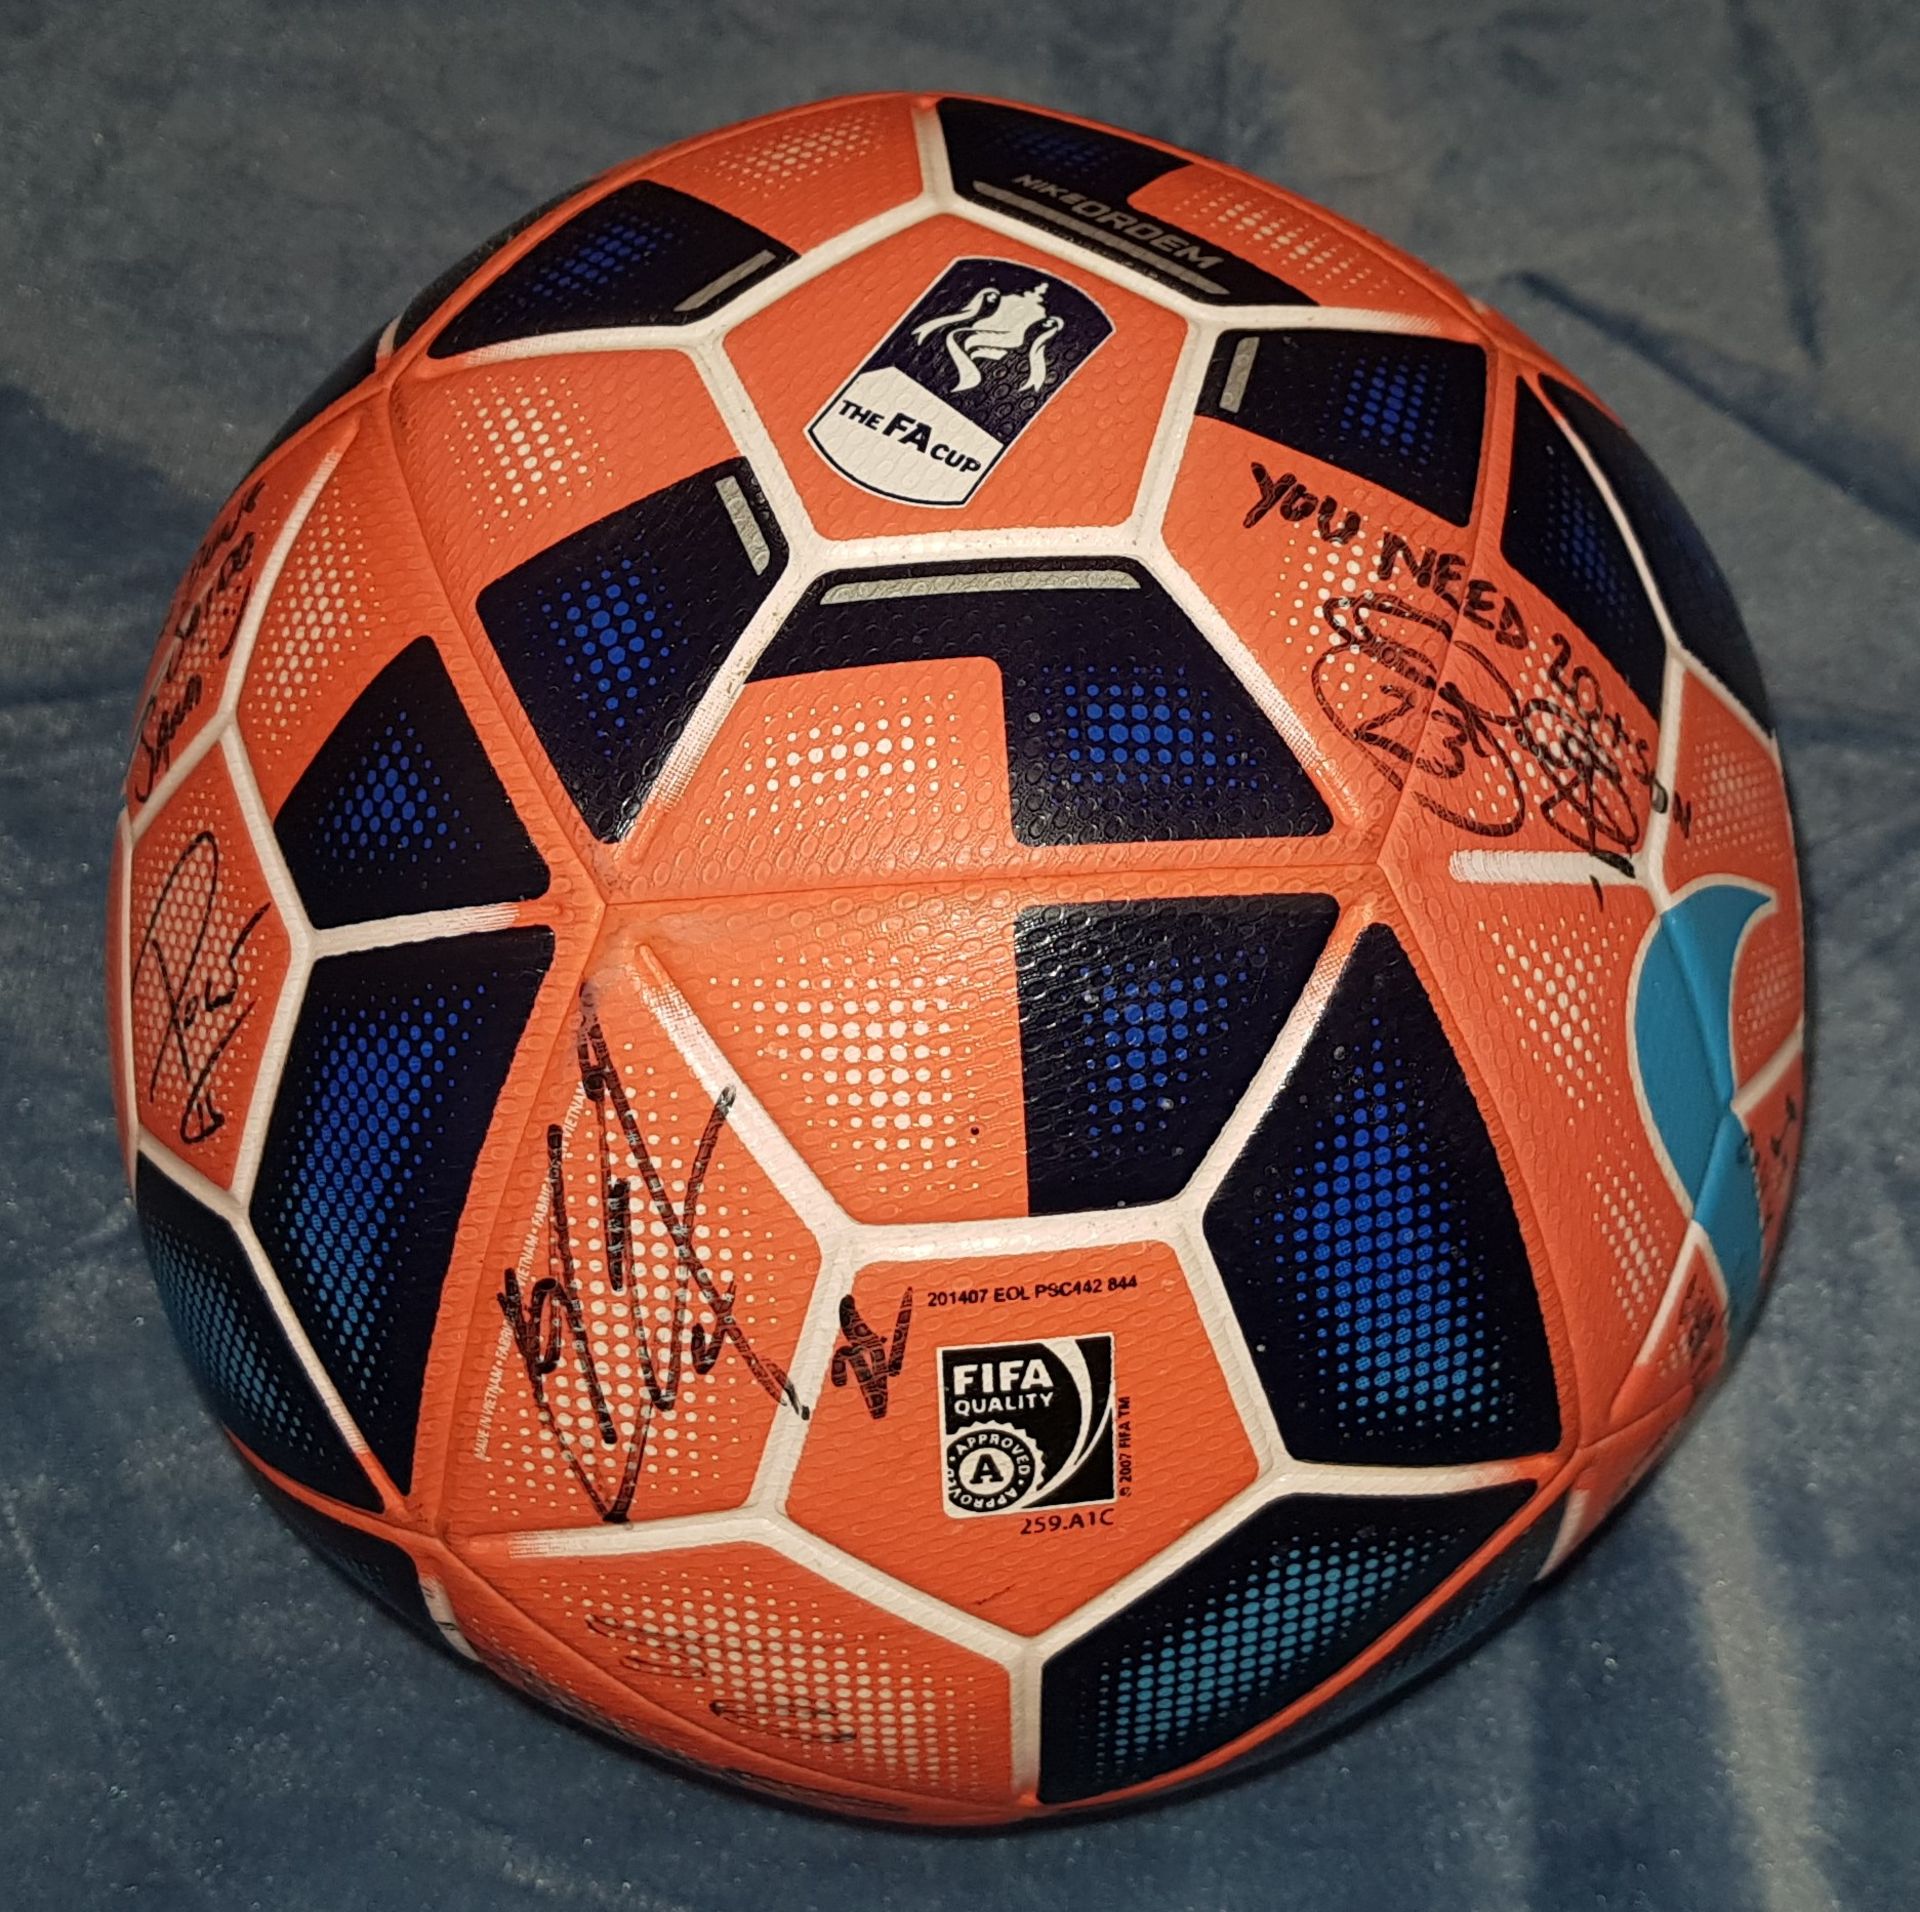 NIKE ORDEM THE FA CUP OFFICIAL MATCH BALL WITH NUMEROUS UNKNOWN SIGNATURES (SEE IMAGES)